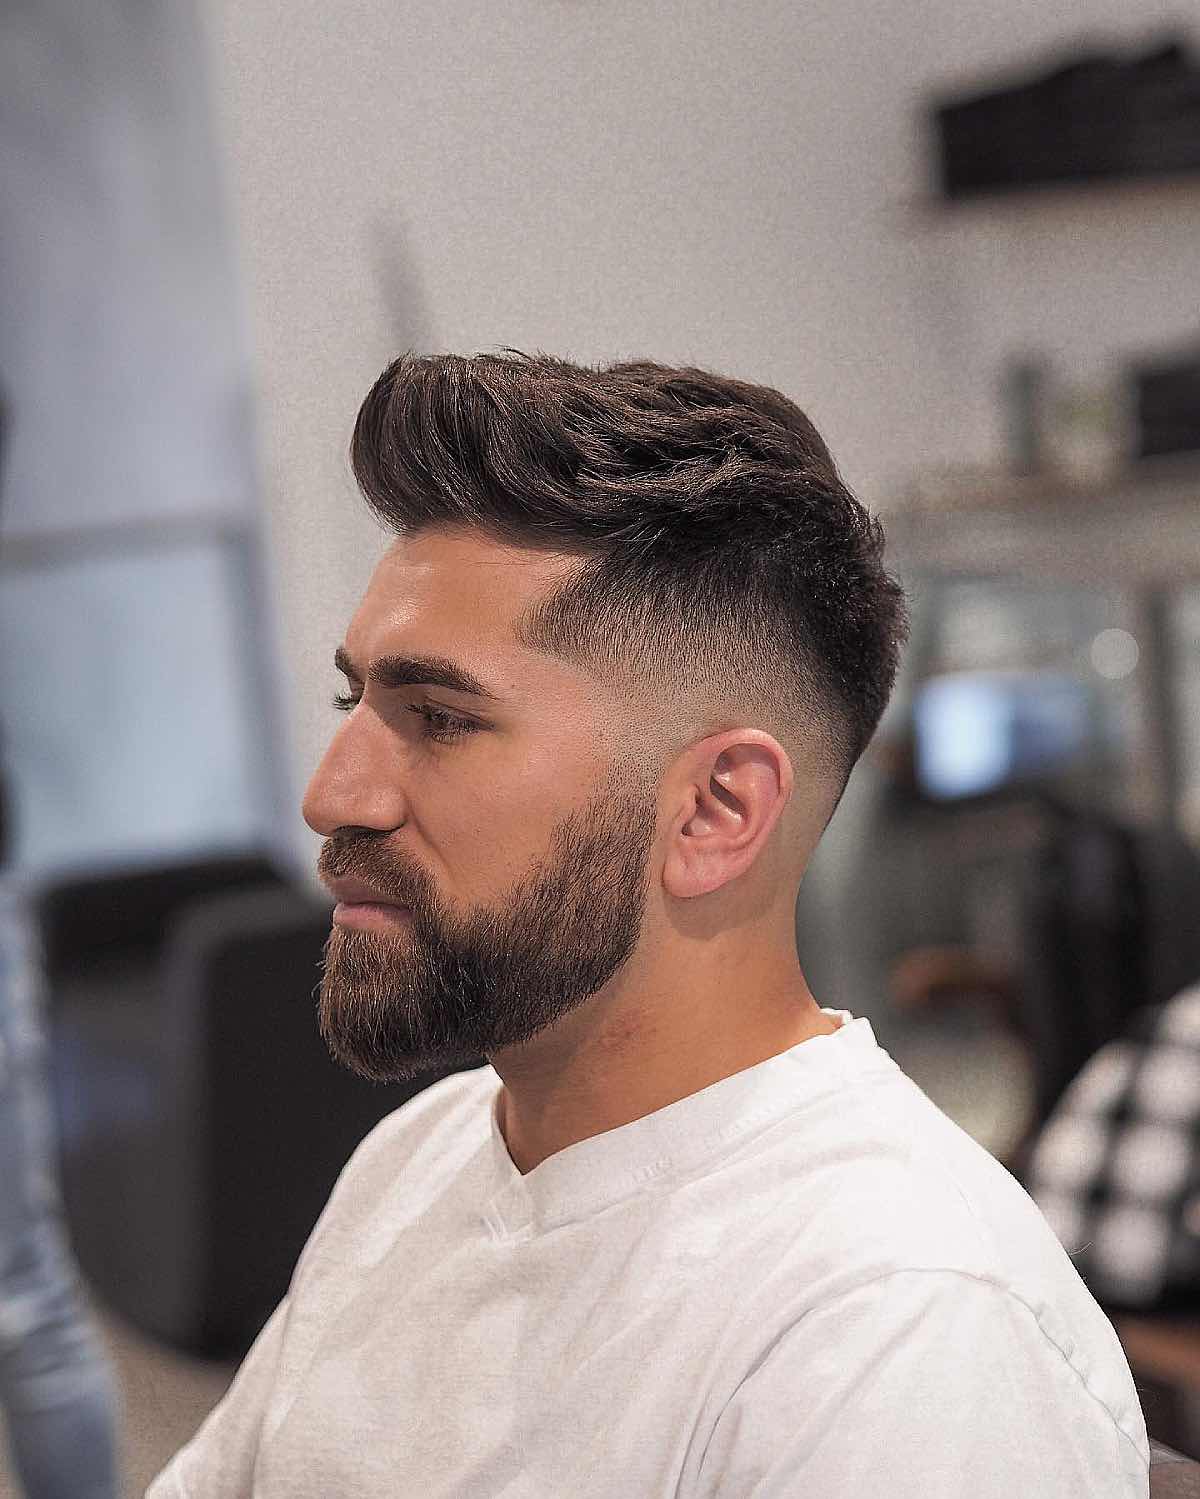 Quiff Haircut For Men - 40 Manly Voluminous Hairstyles